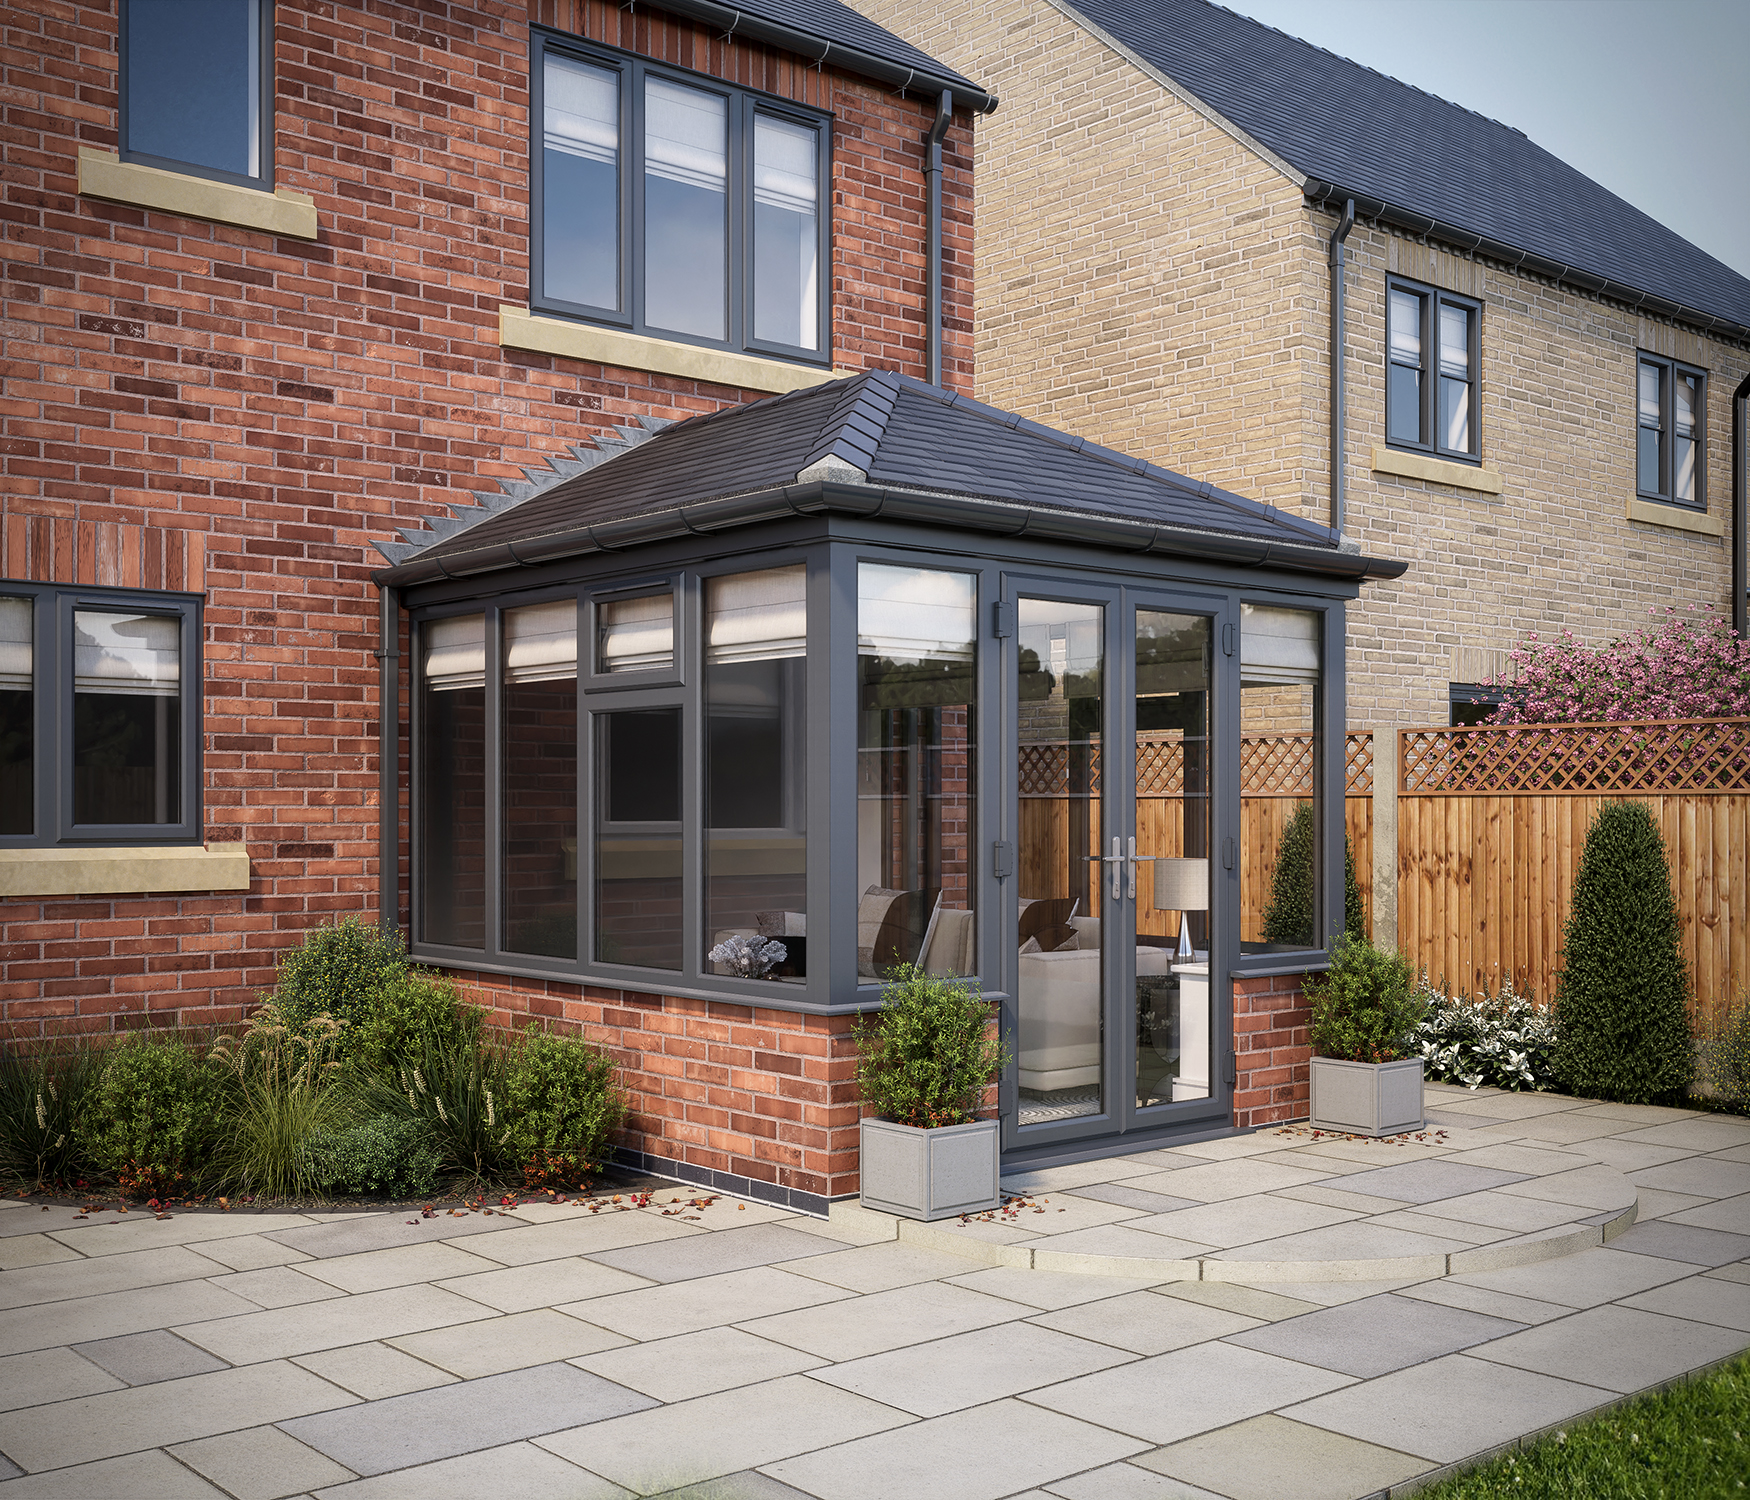 Image of SOLid Roof Edwardian Conservatory Grey Frames Dwarf Wall with Titanium Grey Tiles - 10 x 10ft